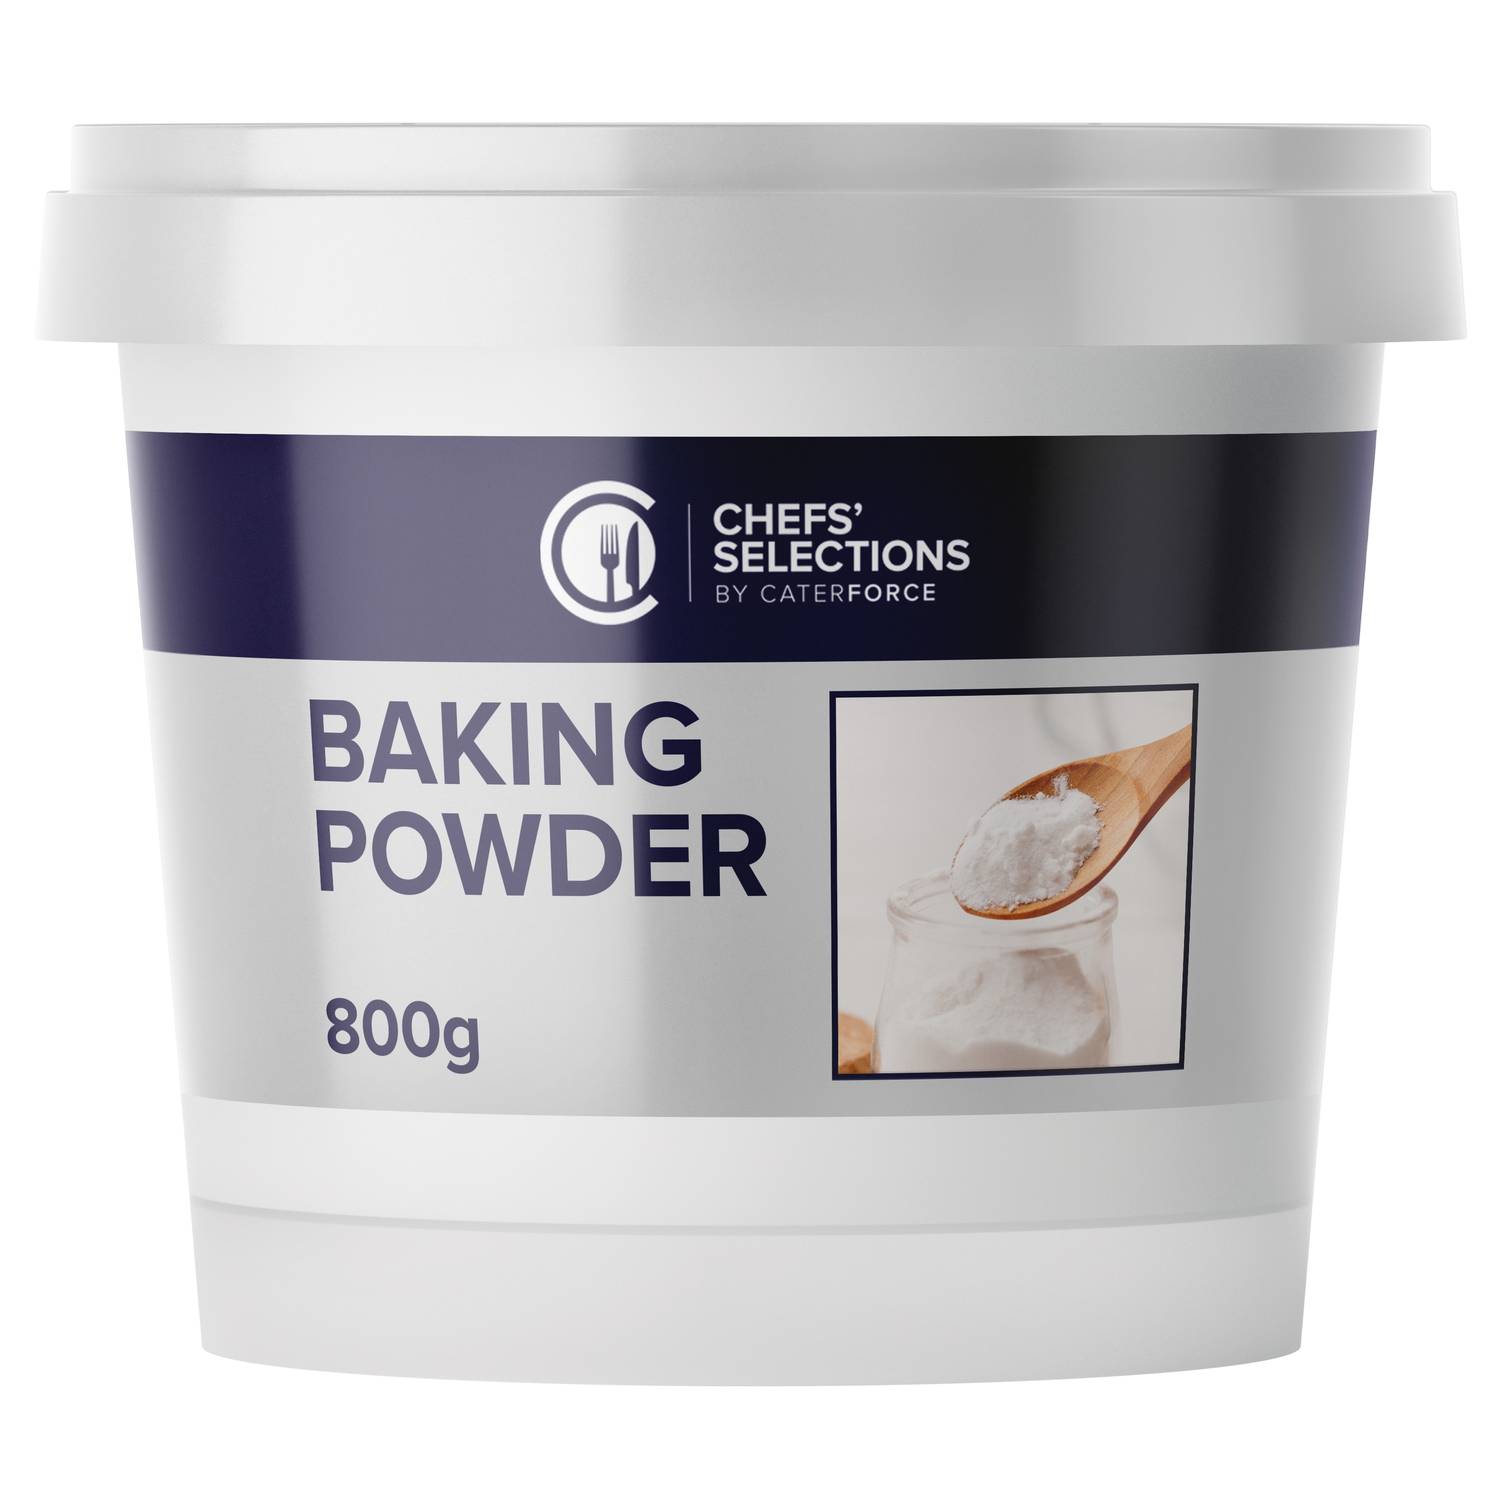 Chefs’ Selections Baking Powder (6 x 800g)